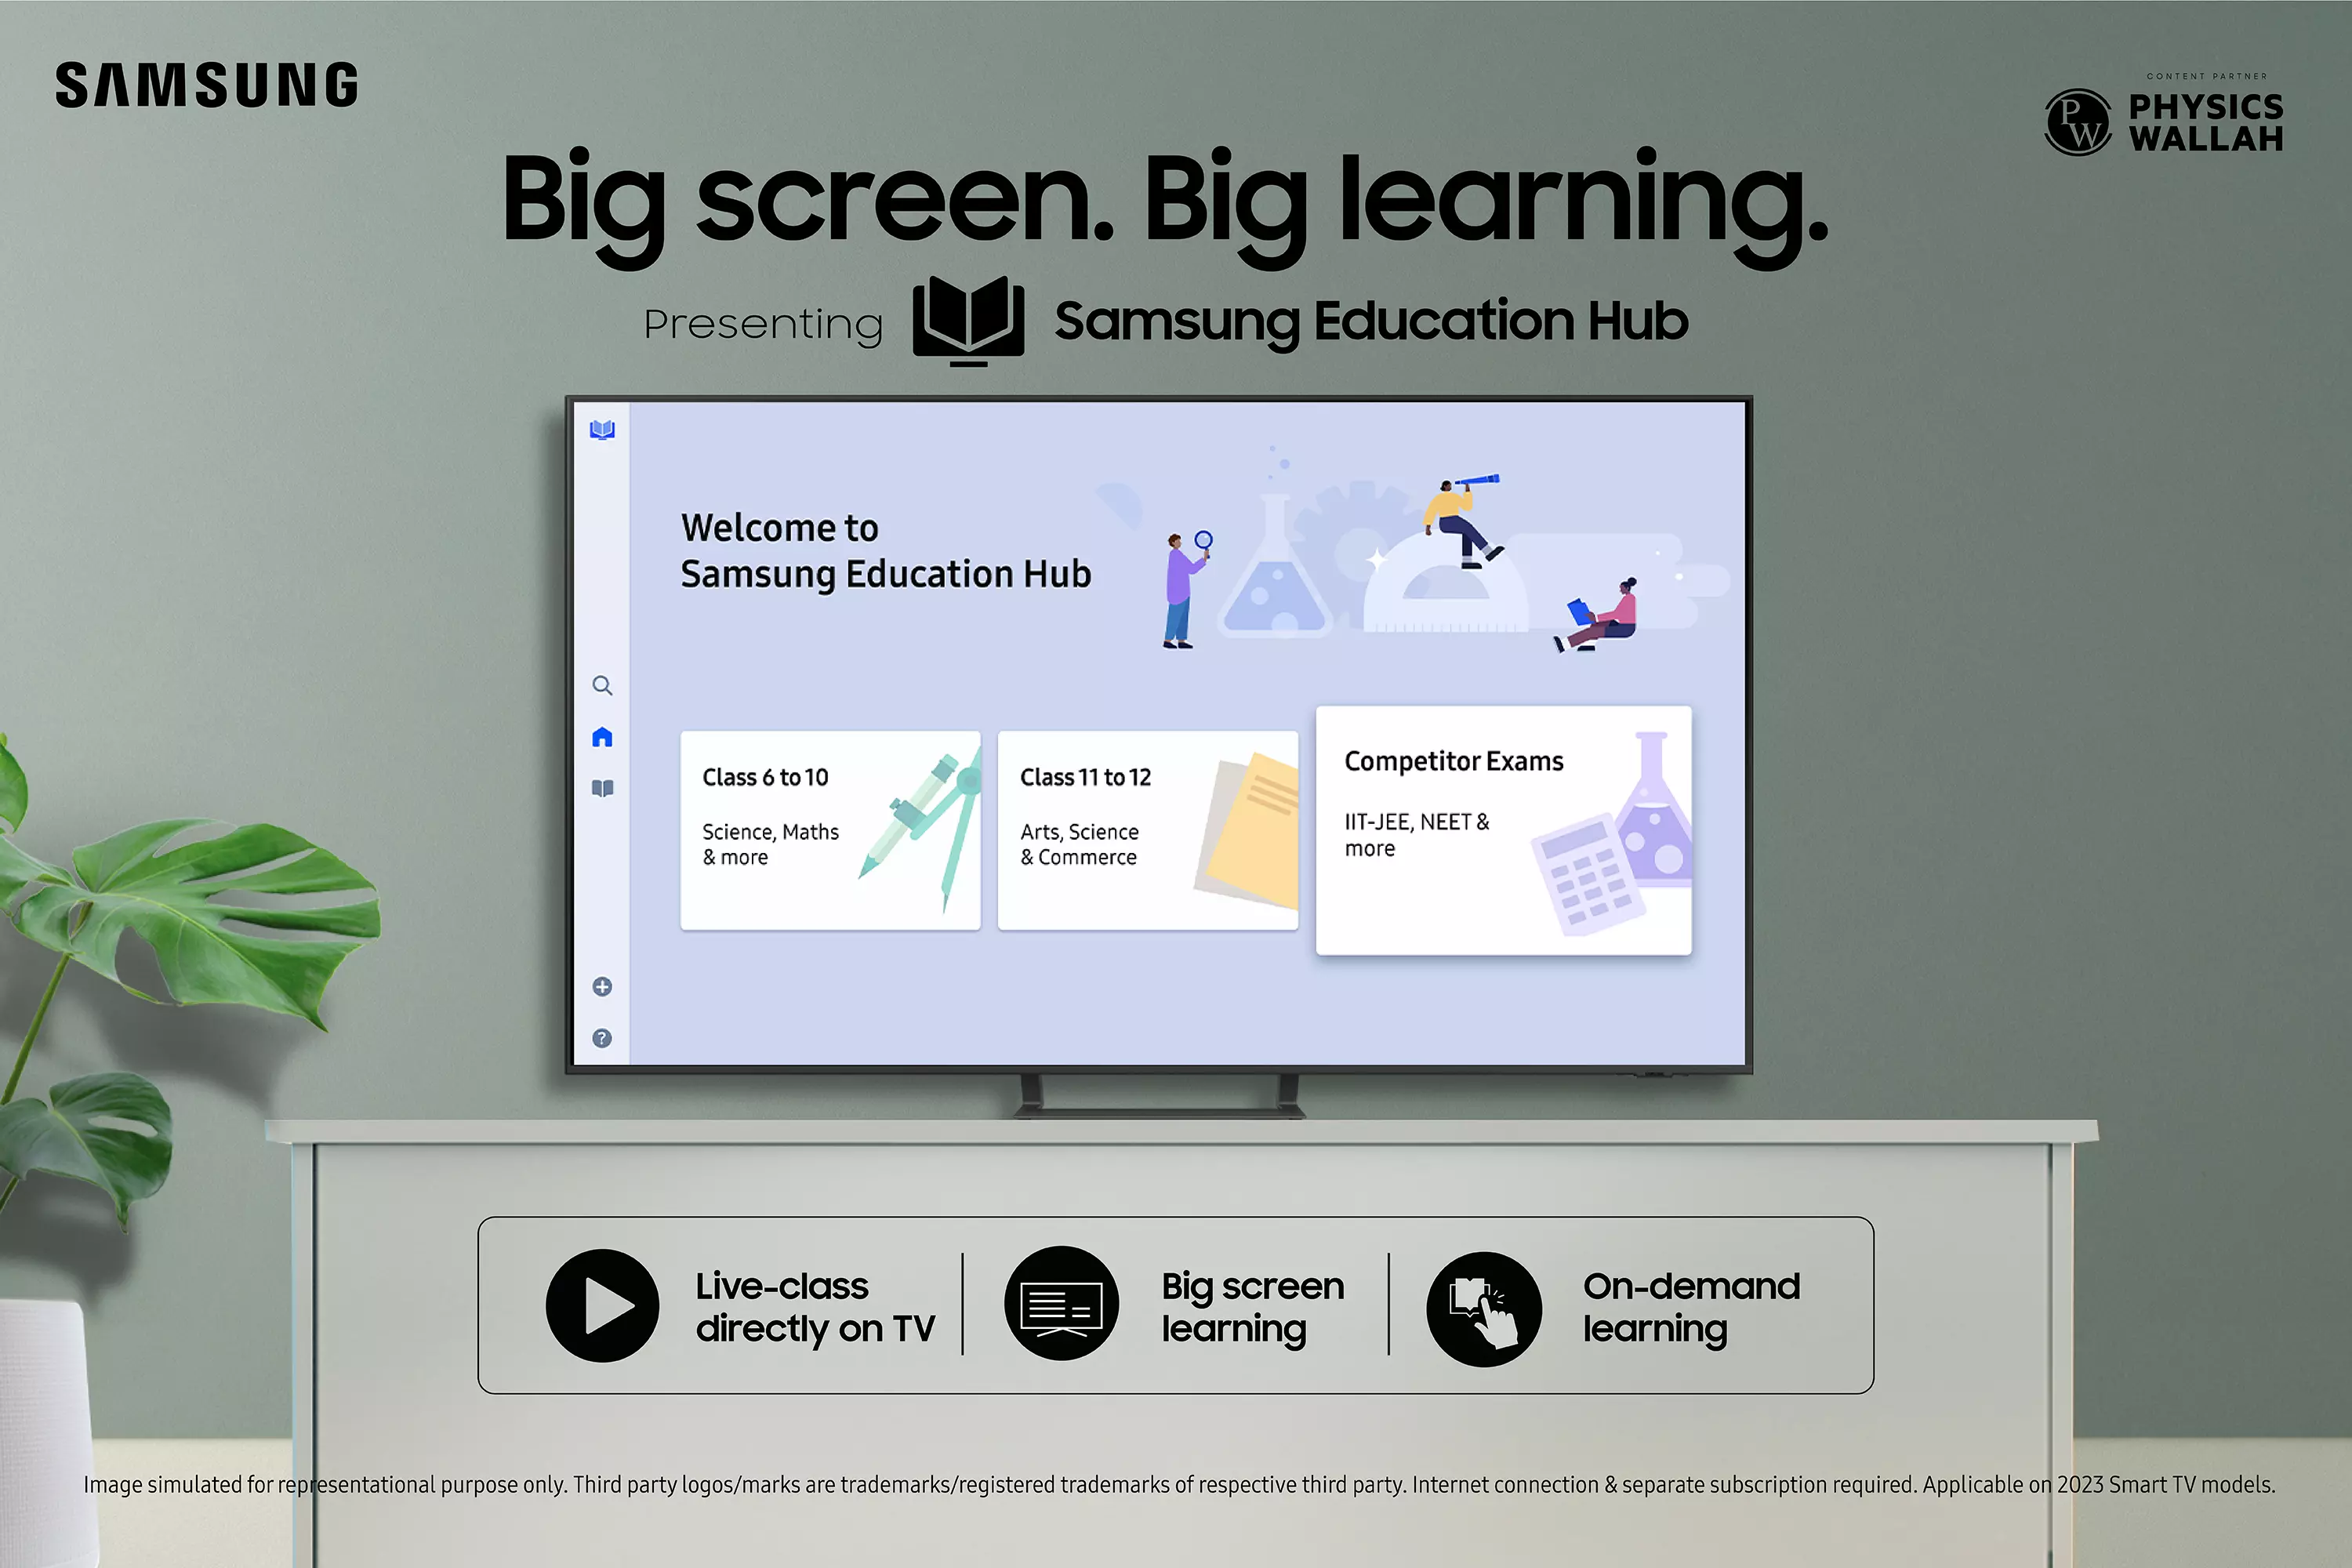 Samsung Aims to Elevate Online Education Experience for Students